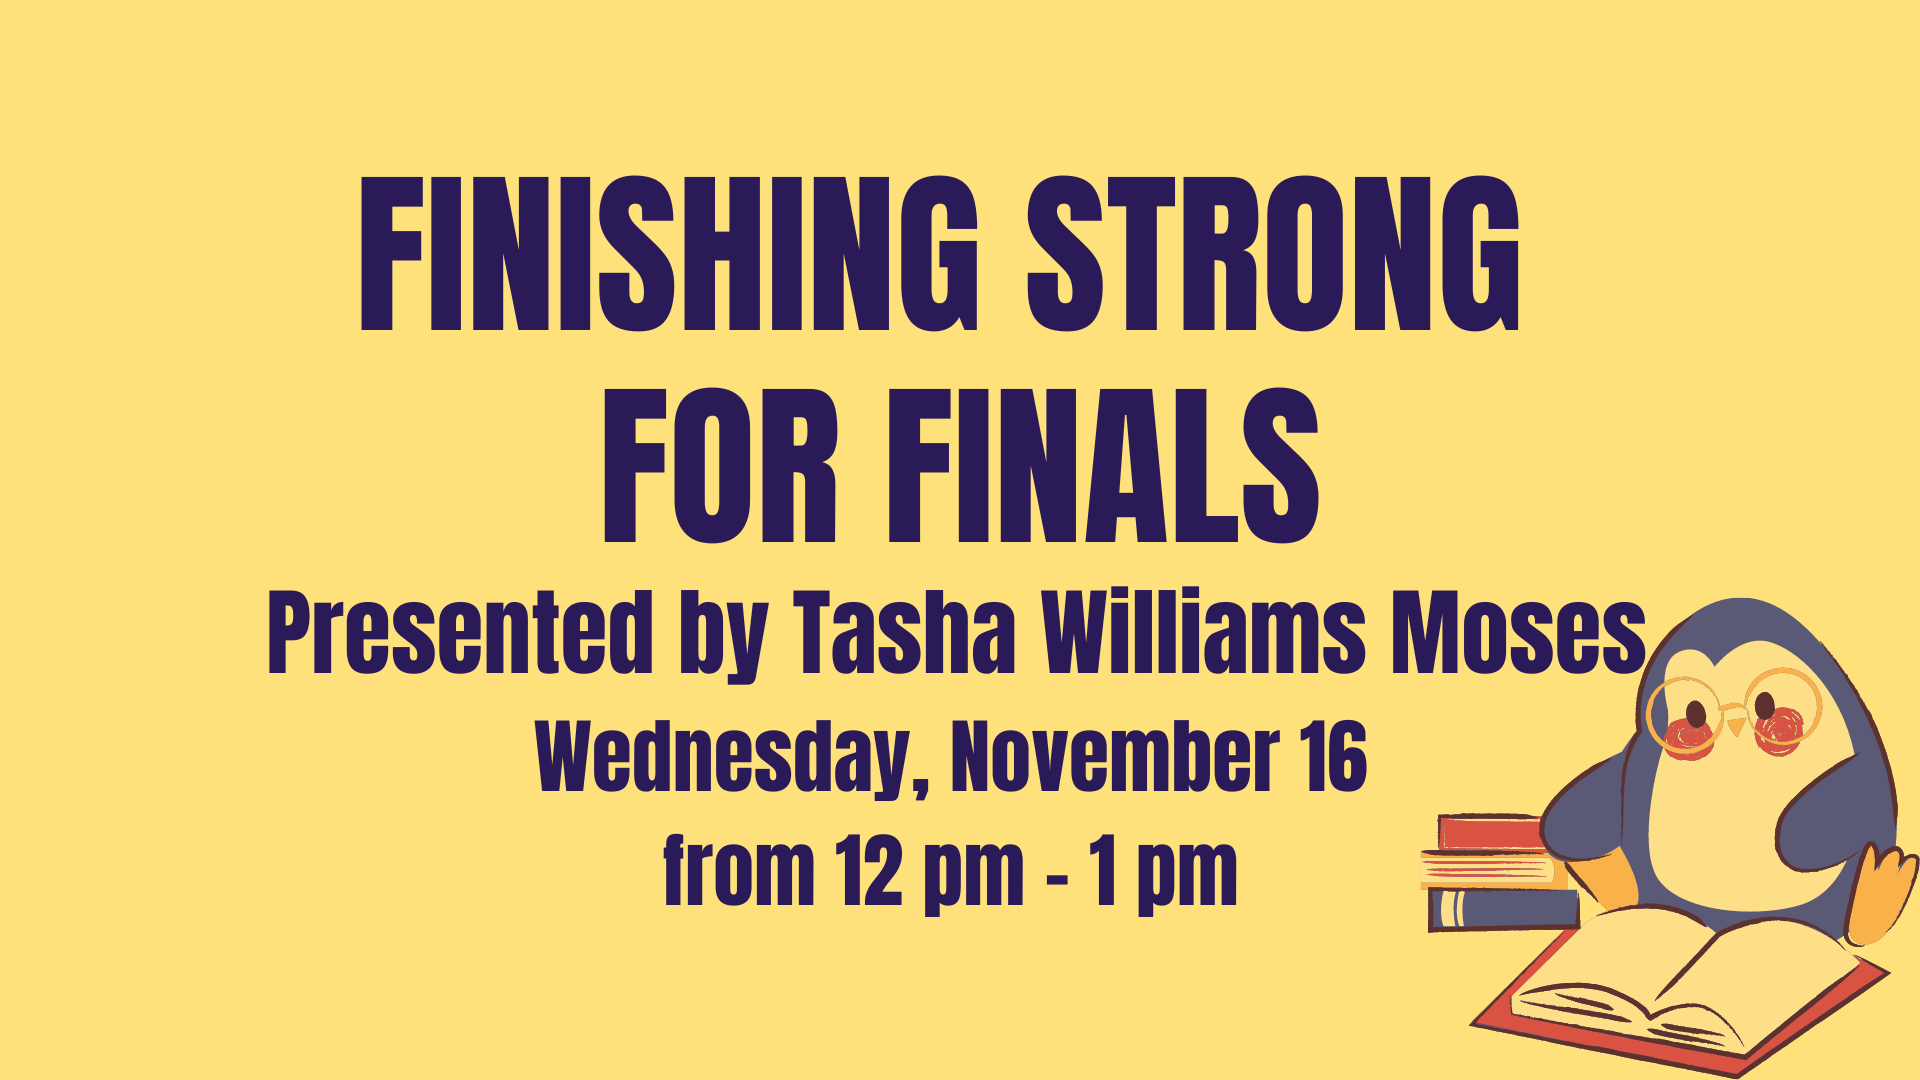 Finishing strong for finals - presented by Tasha Williams Moses